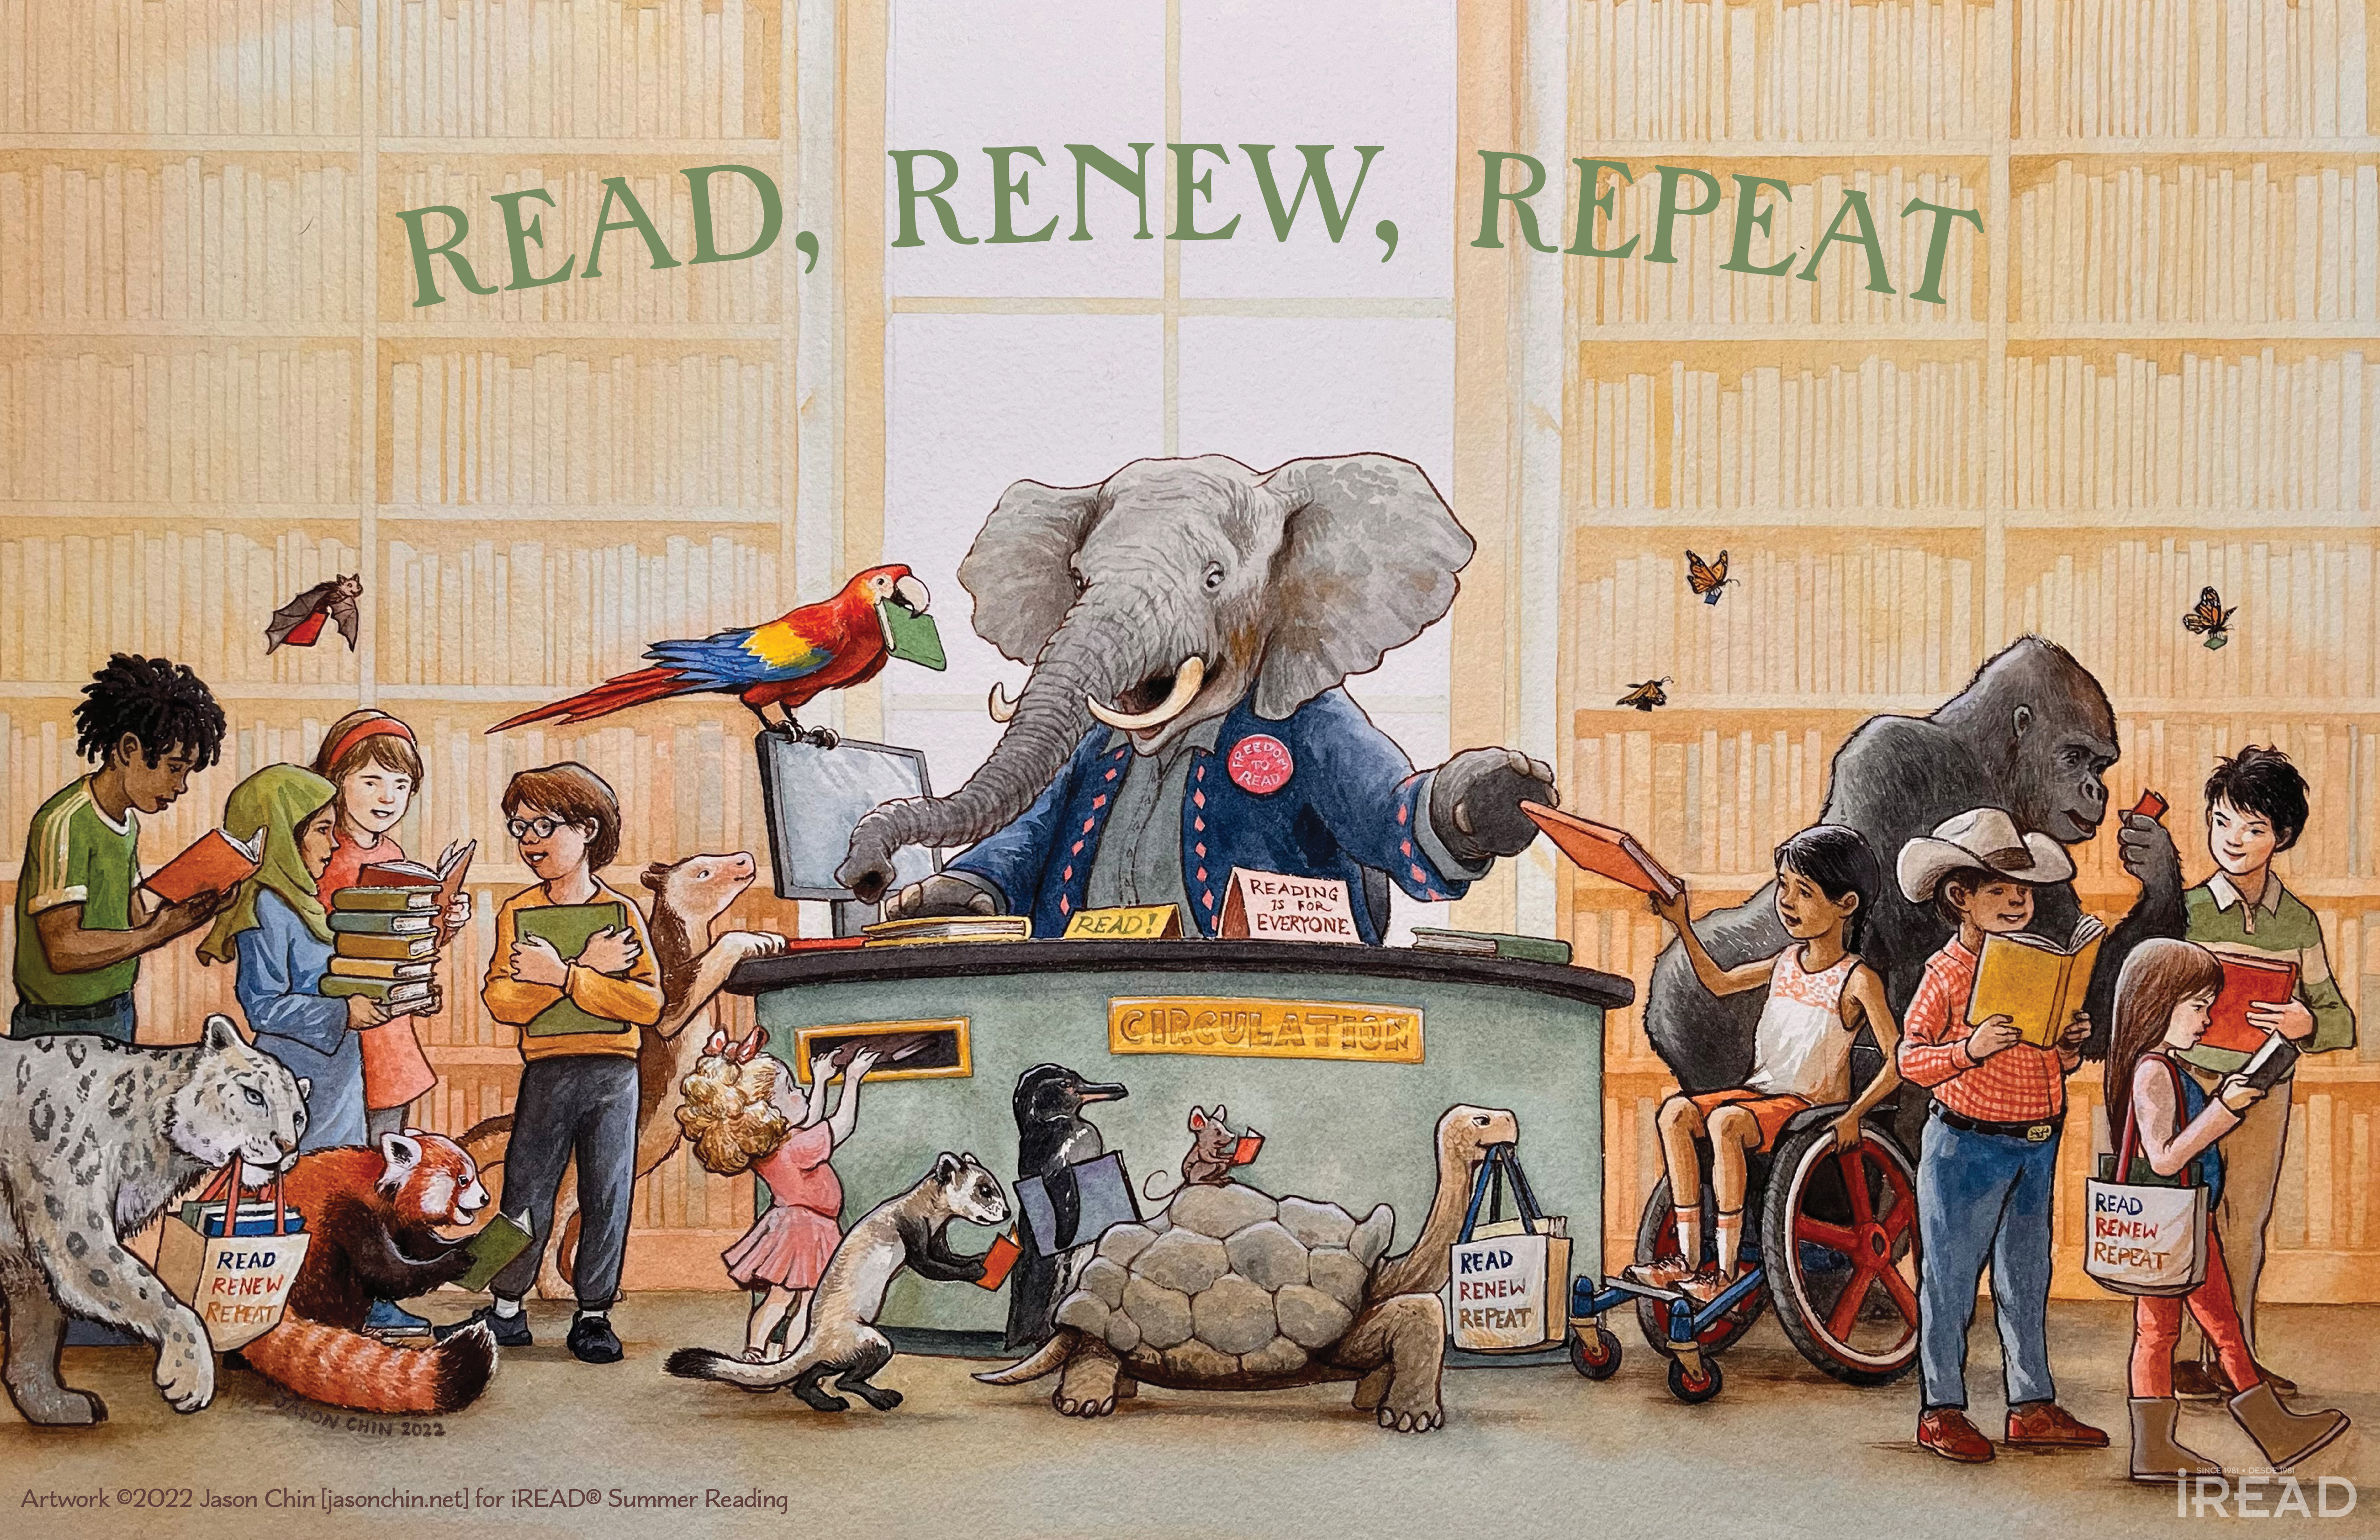 An elephant librarian seated at a large, round desk checks out books to a menagerie of animals and people under the banner: "read, renew, repeat"